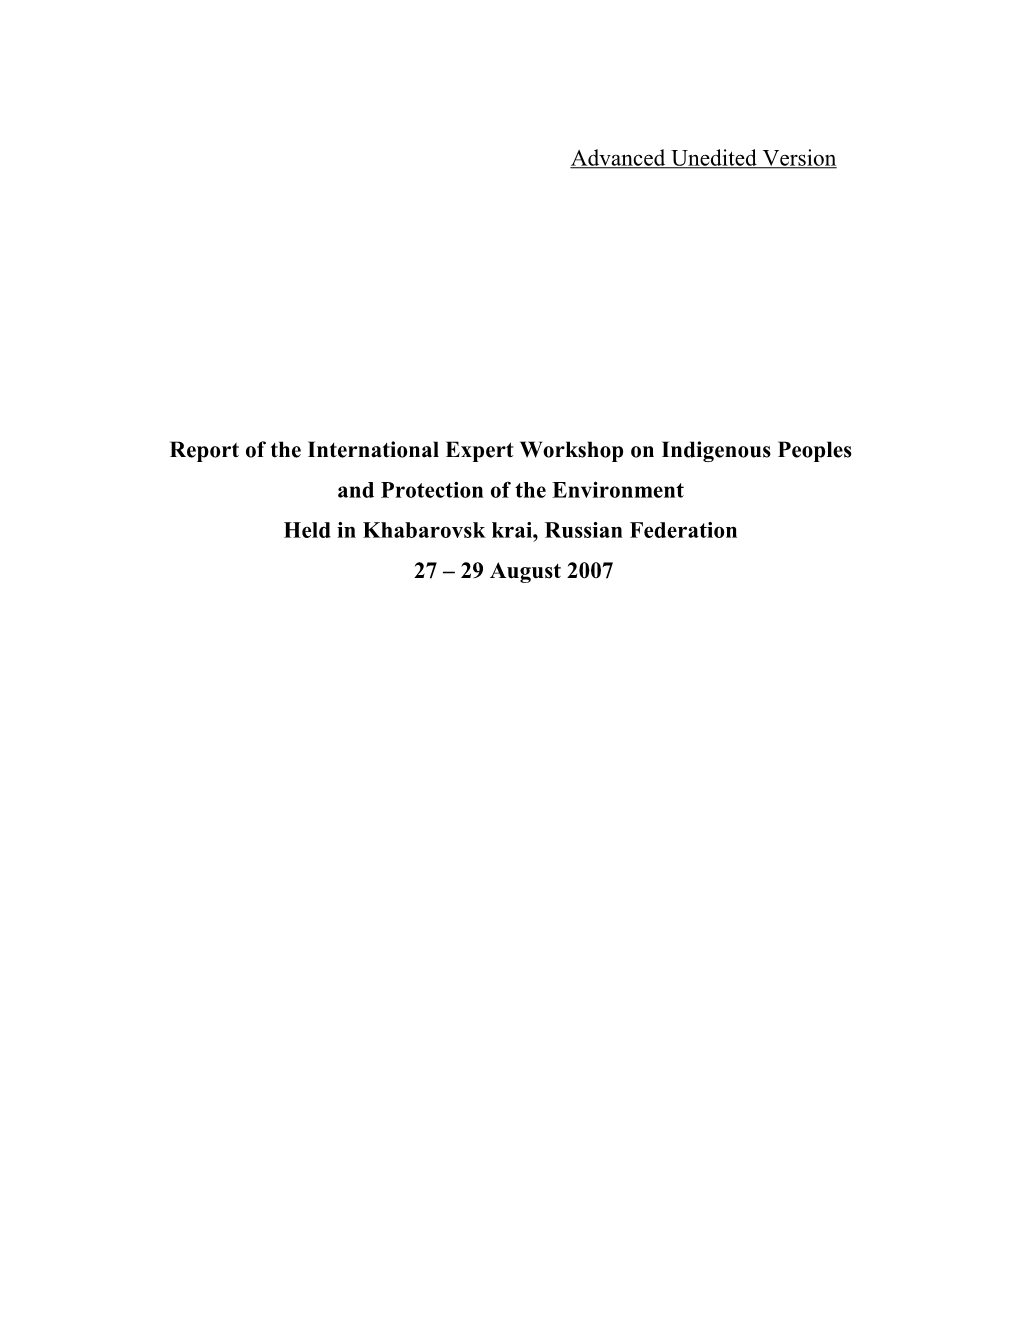 Report of the International Expert Workshop on Indigenous Peoples and Protection of The